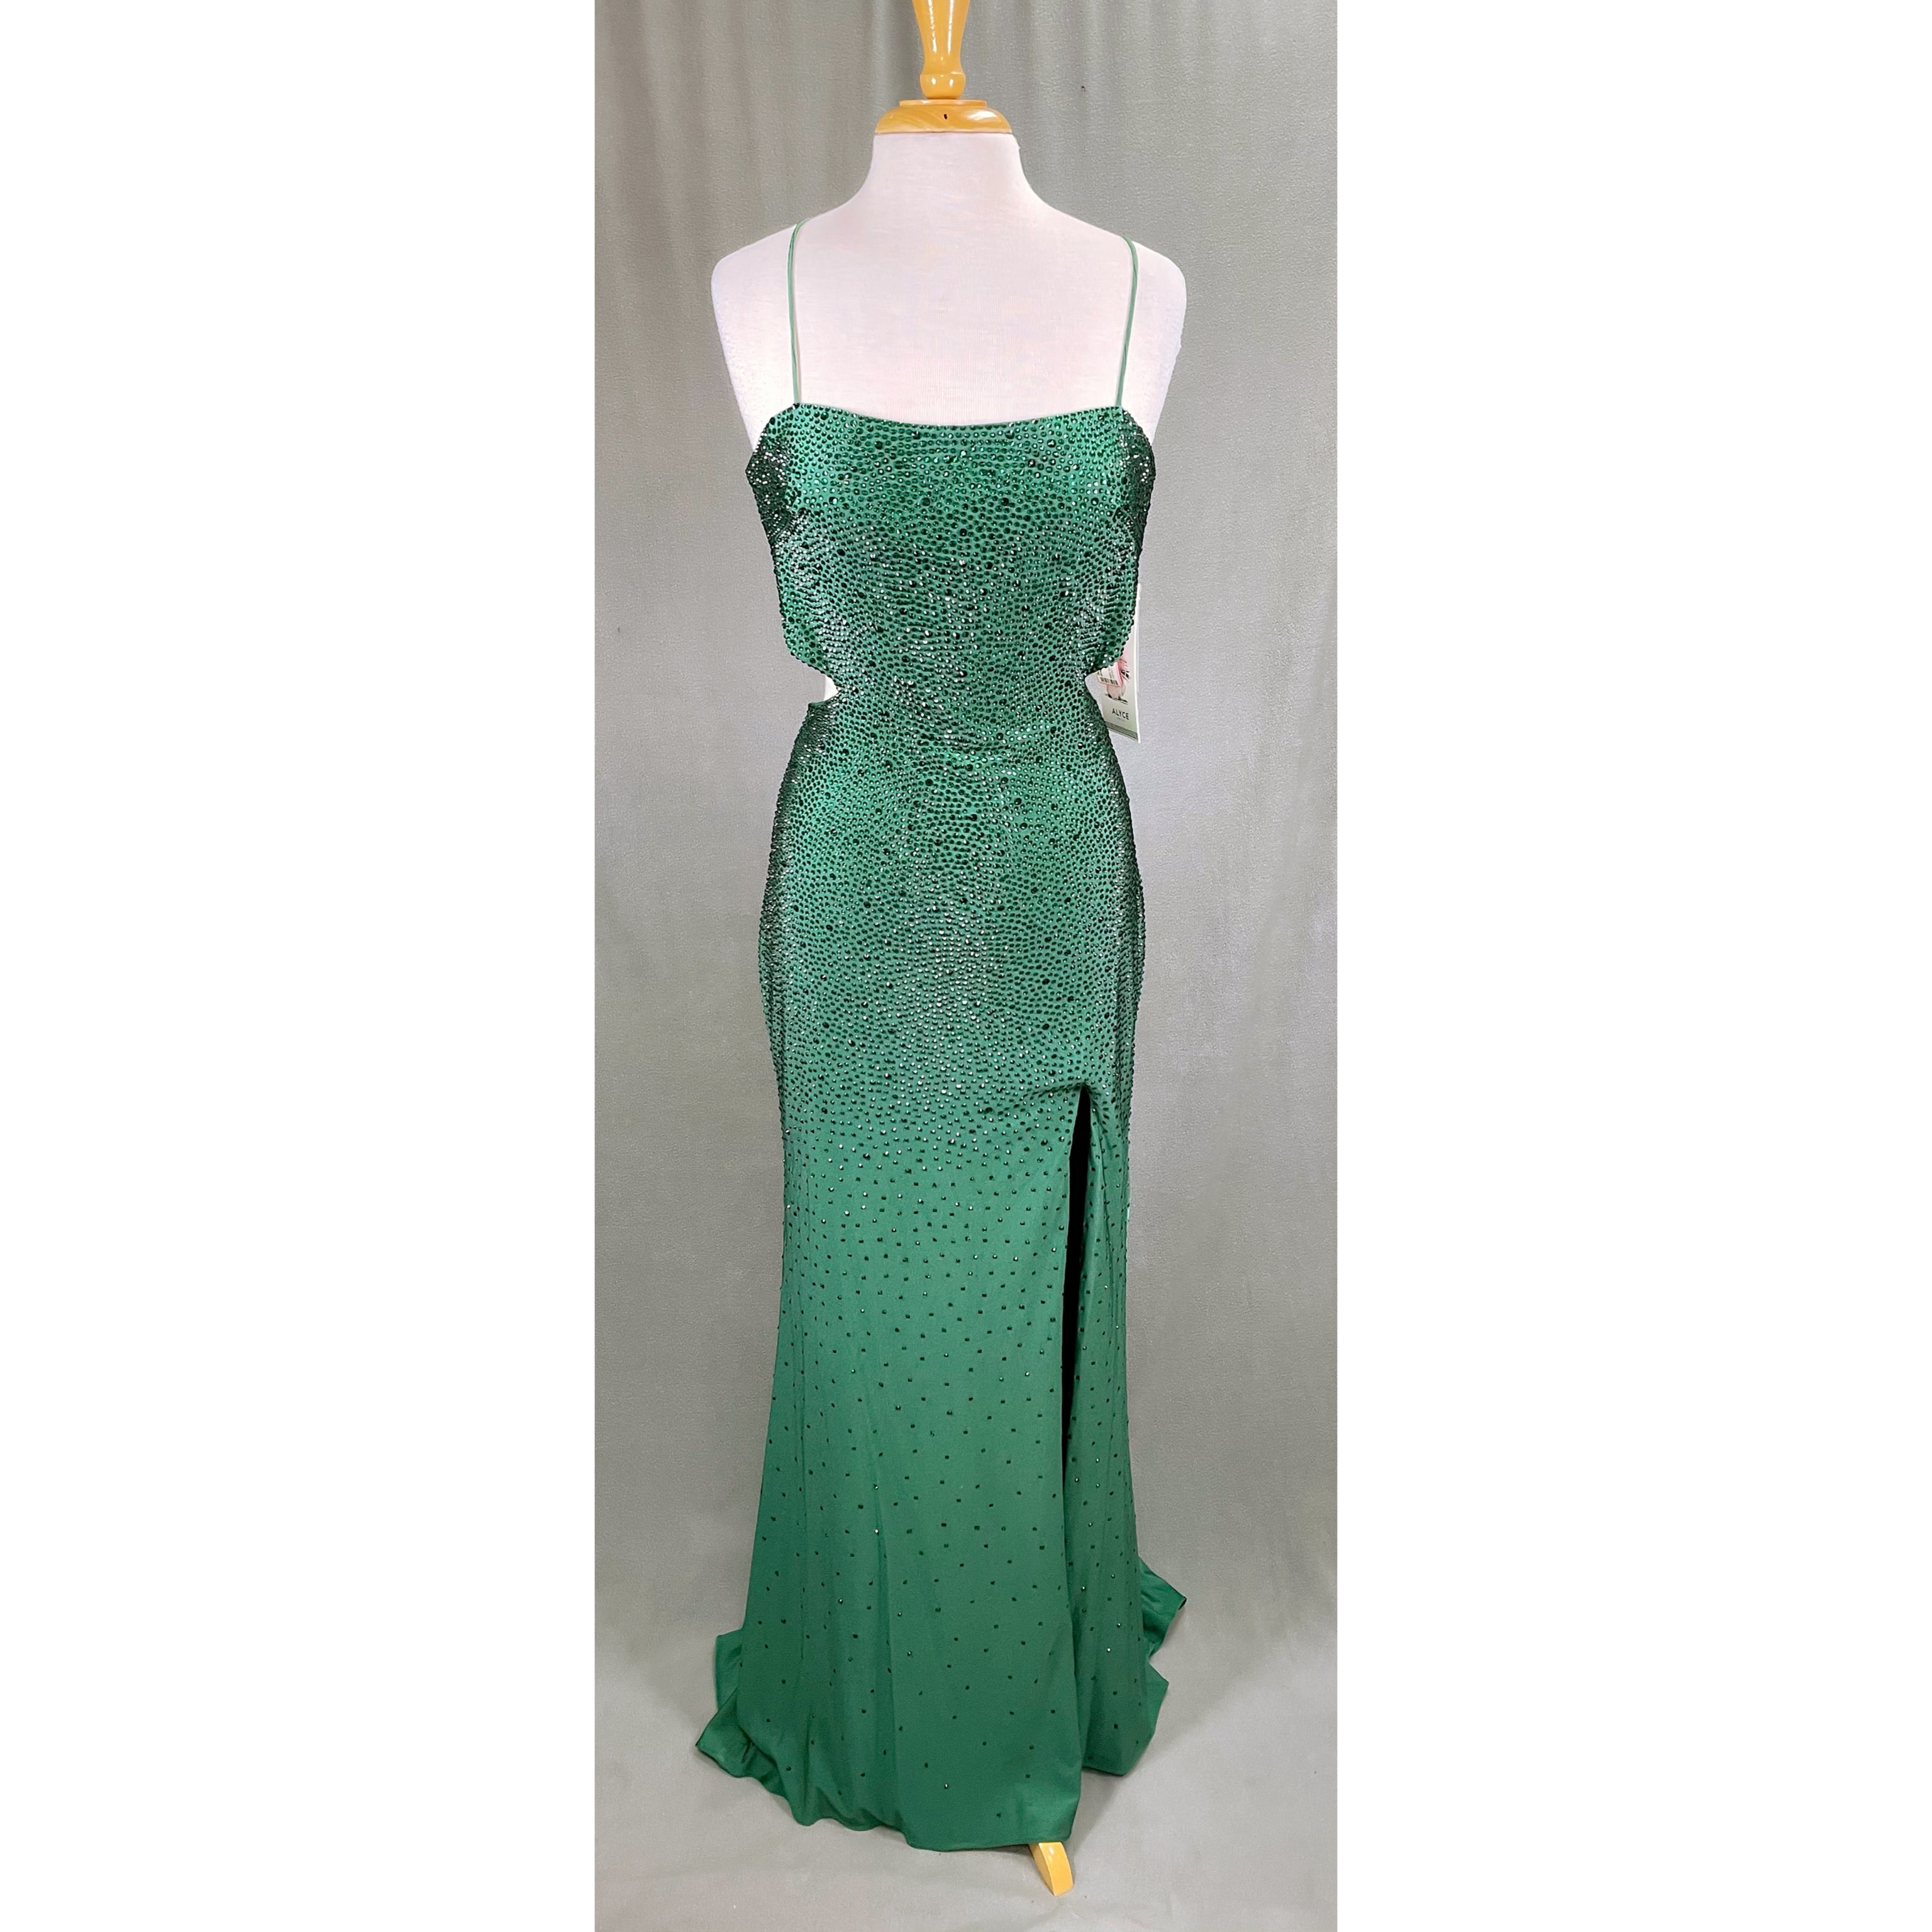 Alyce emerald dress, size 10, NEW WITH TAGS!